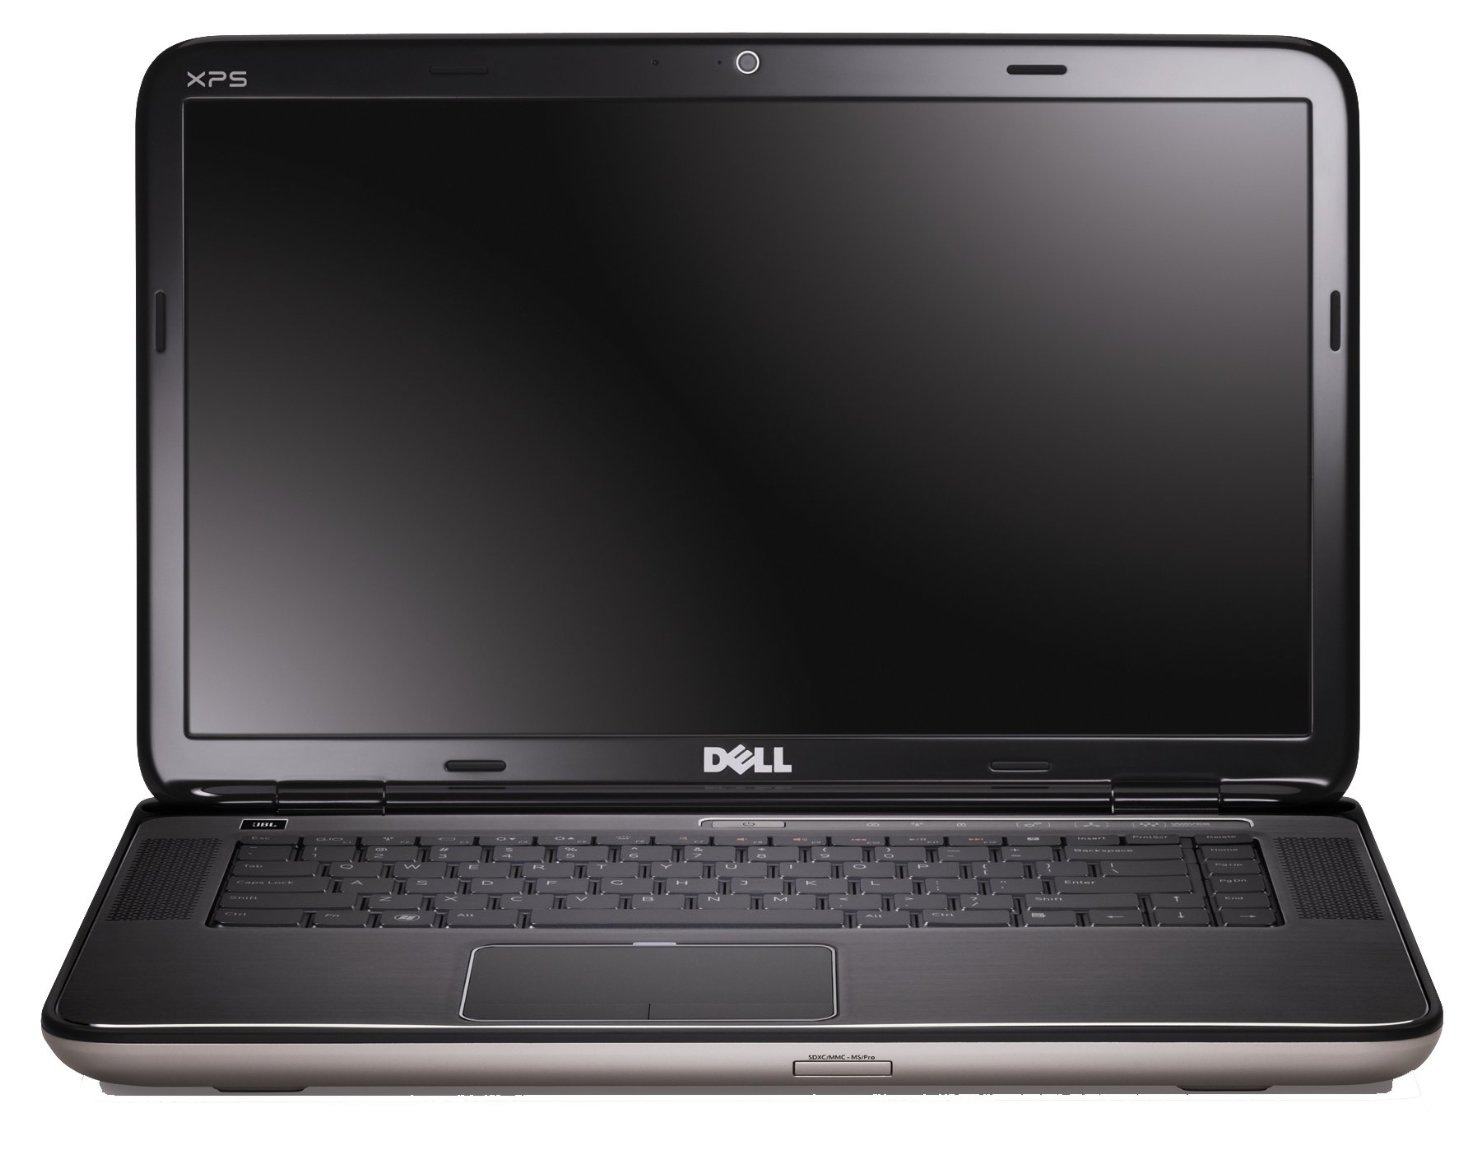  Dell XPS 15 9570-5420  #1